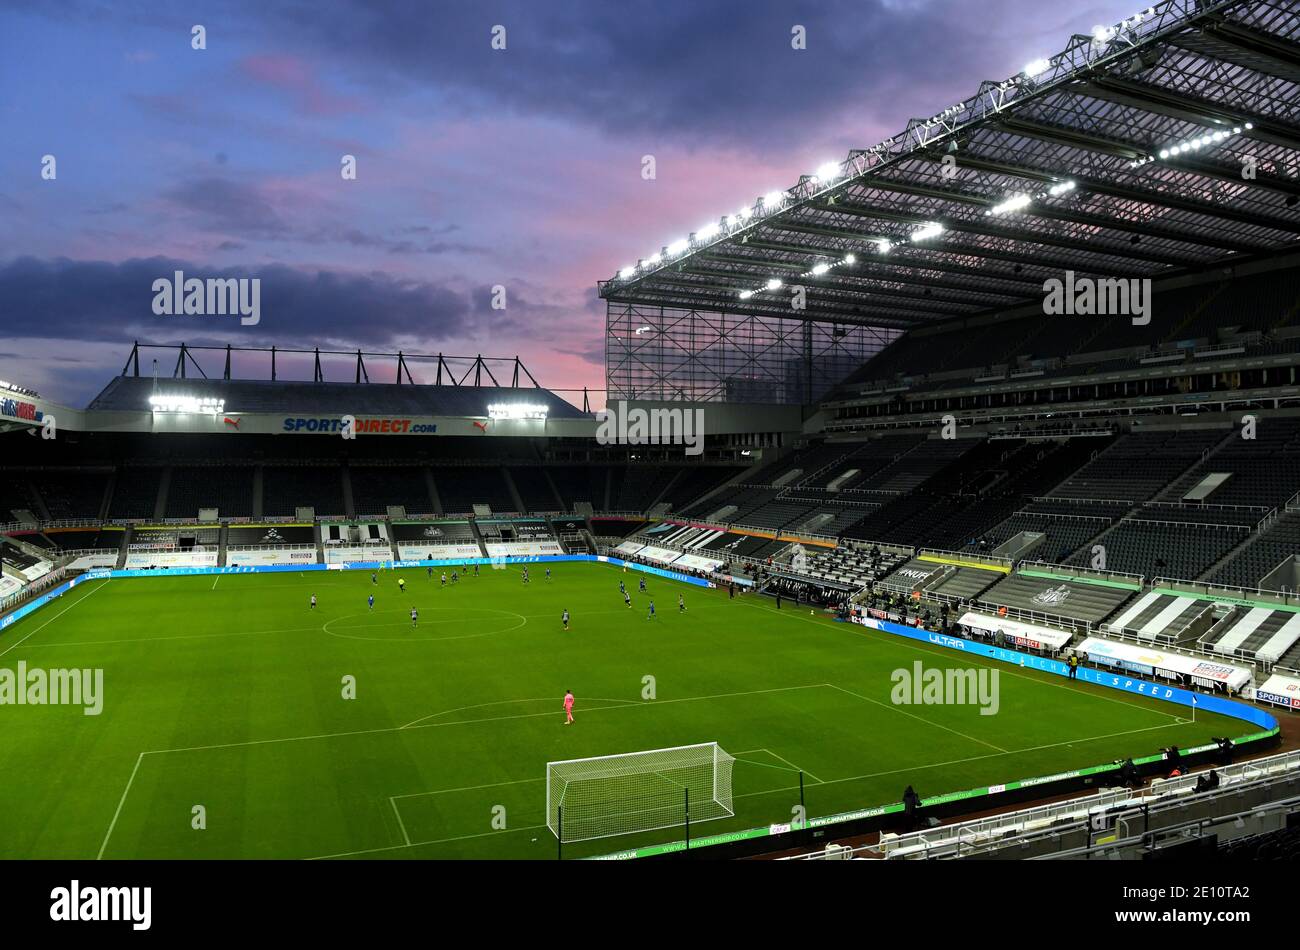 A general view of the players in action during the Premier League match at St James' Park, Newcastle. Stock Photo